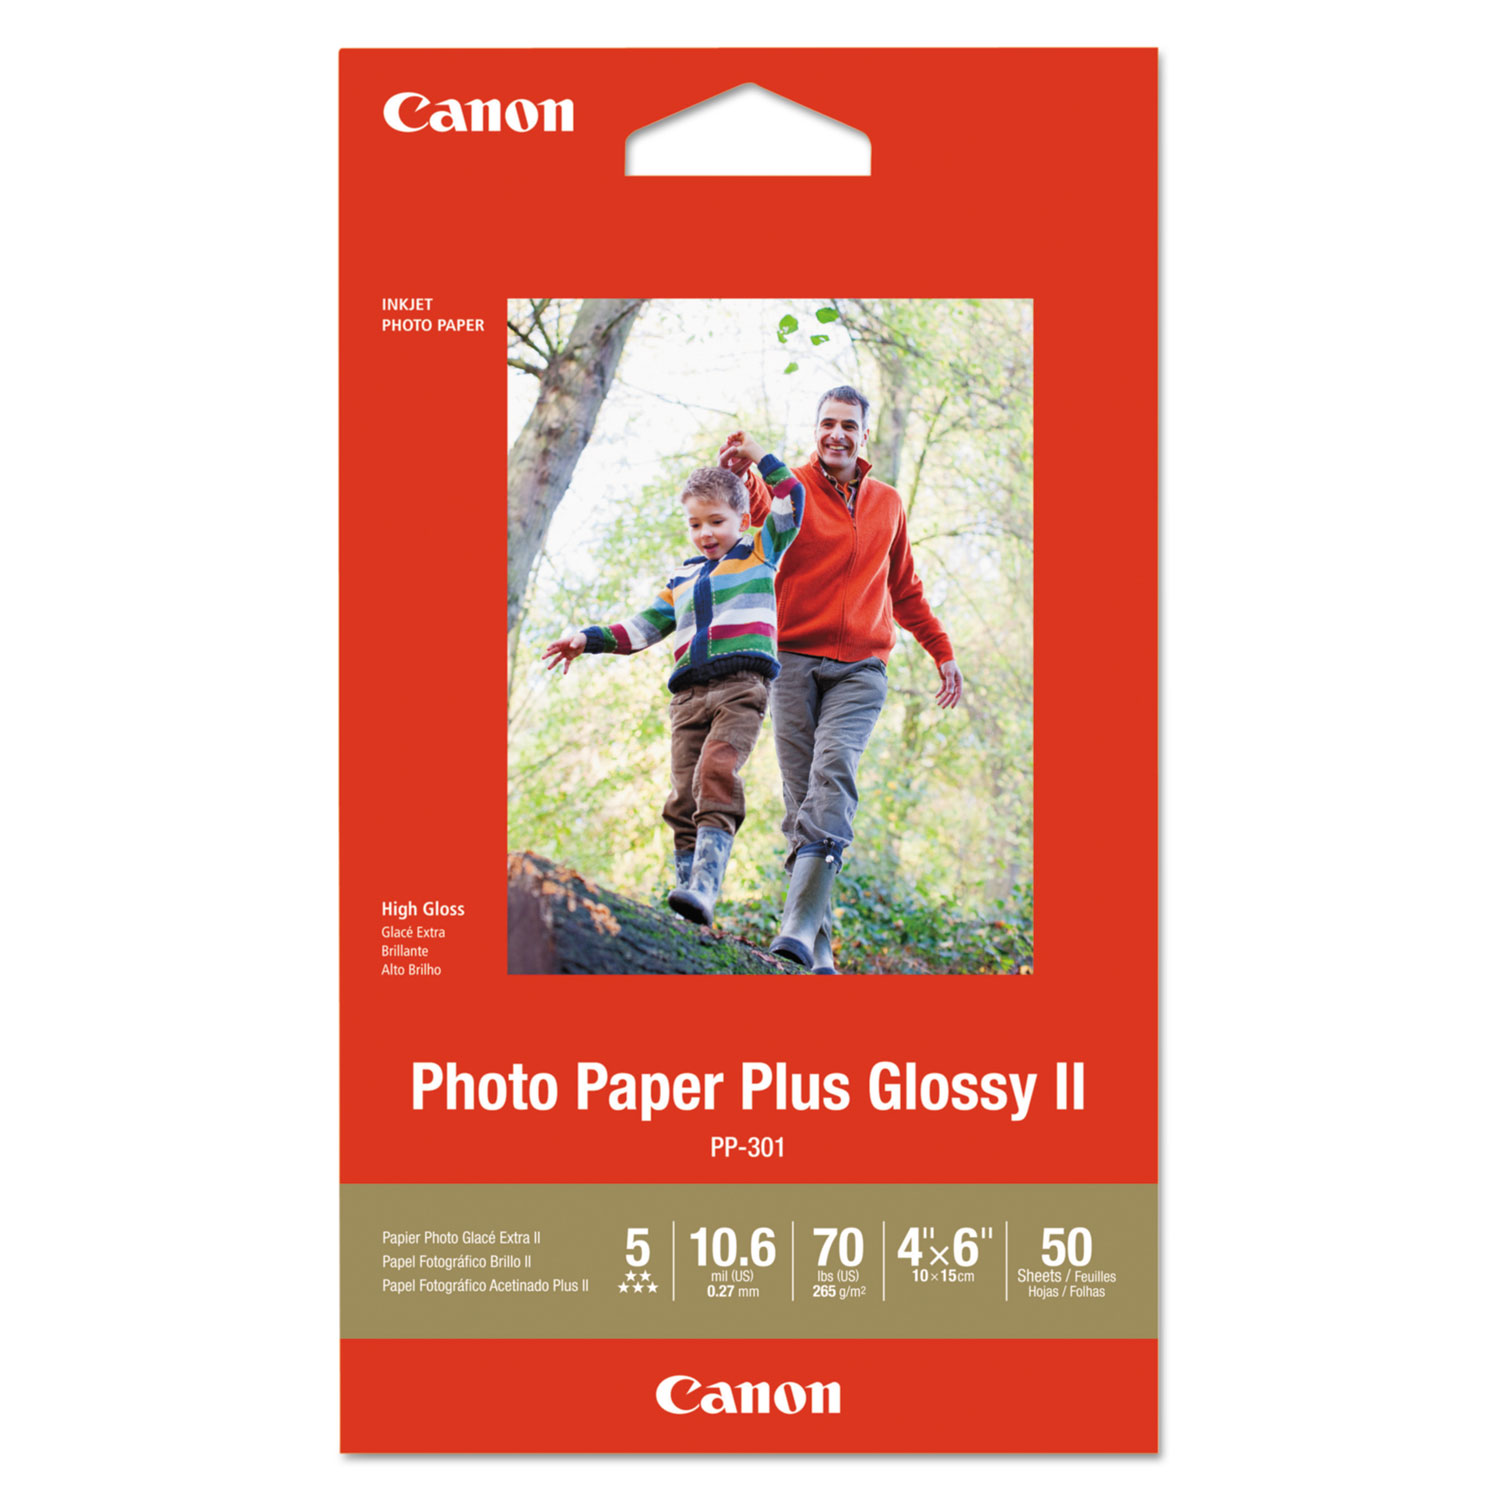 Canon CNM1432C005 70 lbs Photo Paper Plus Glossy II, White - 4 x 6 in. - 50 Sheets Per Pack